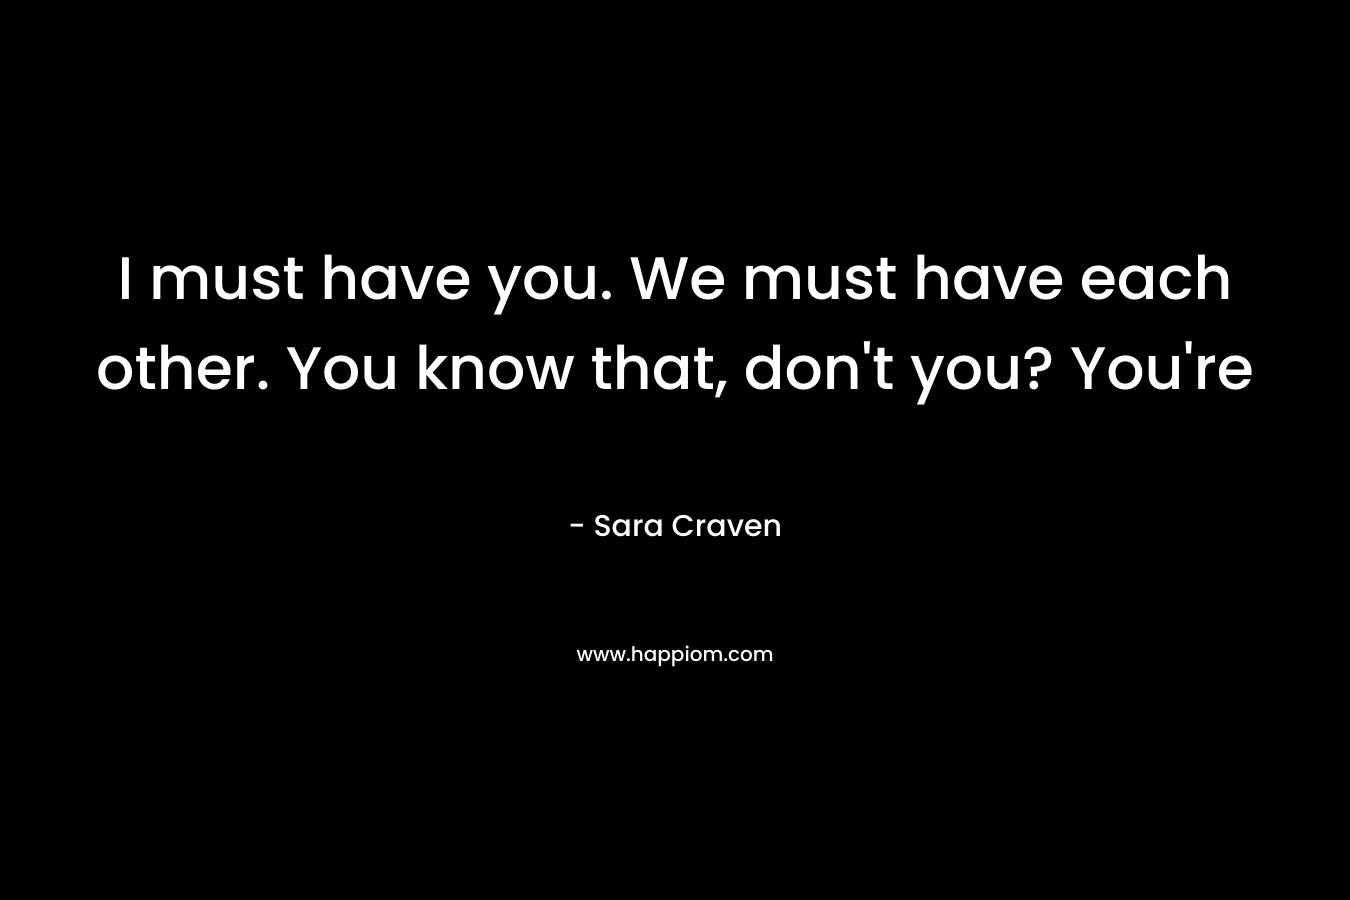 I must have you. We must have each other. You know that, don’t you? You’re – Sara Craven